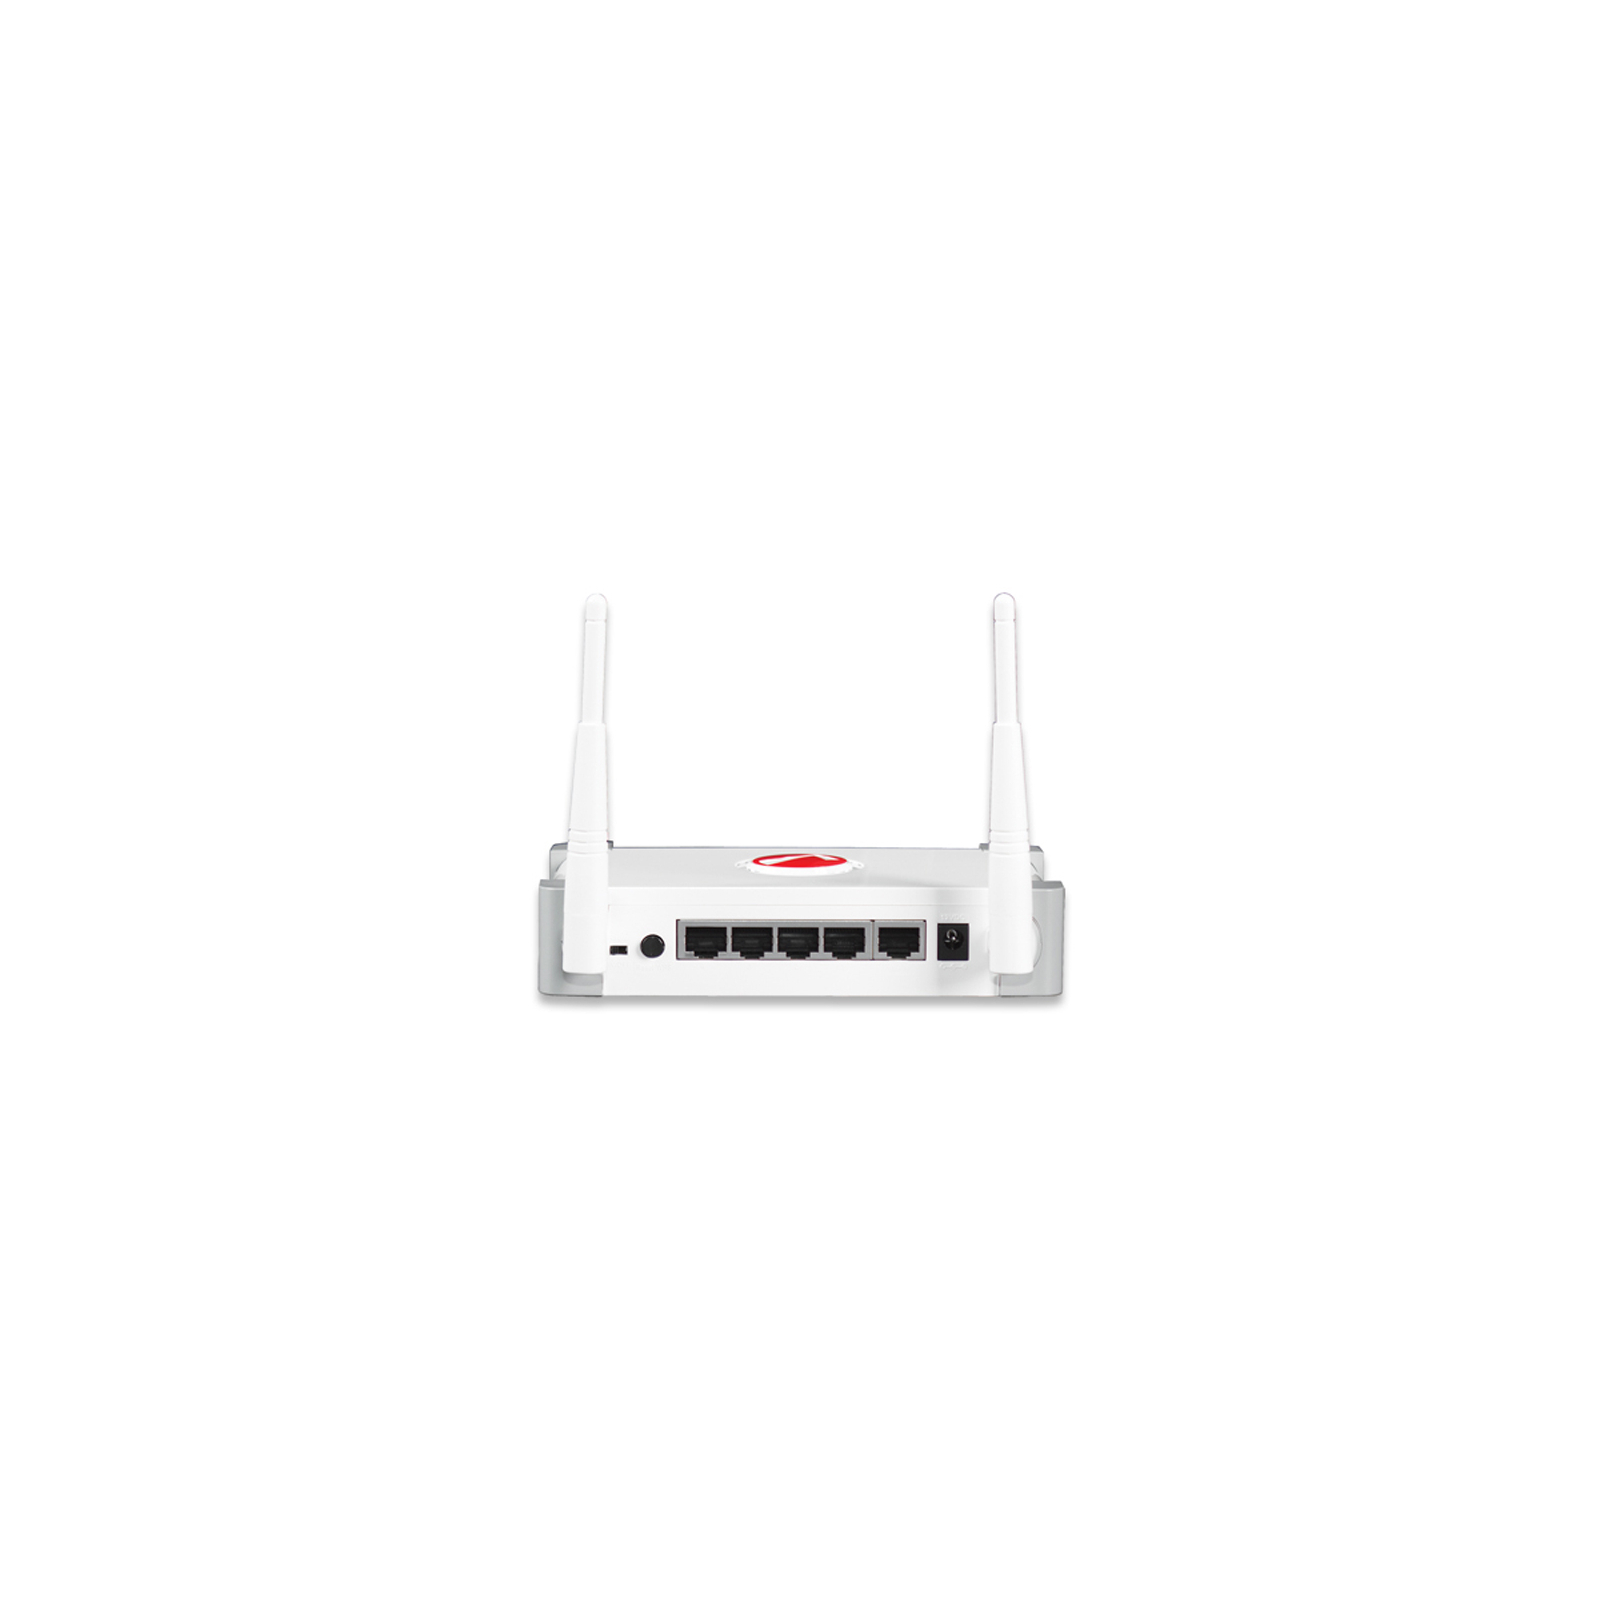 Маршрутизатор Intellinet 3G 4-Port Router MIMO 2T2R изображение 3